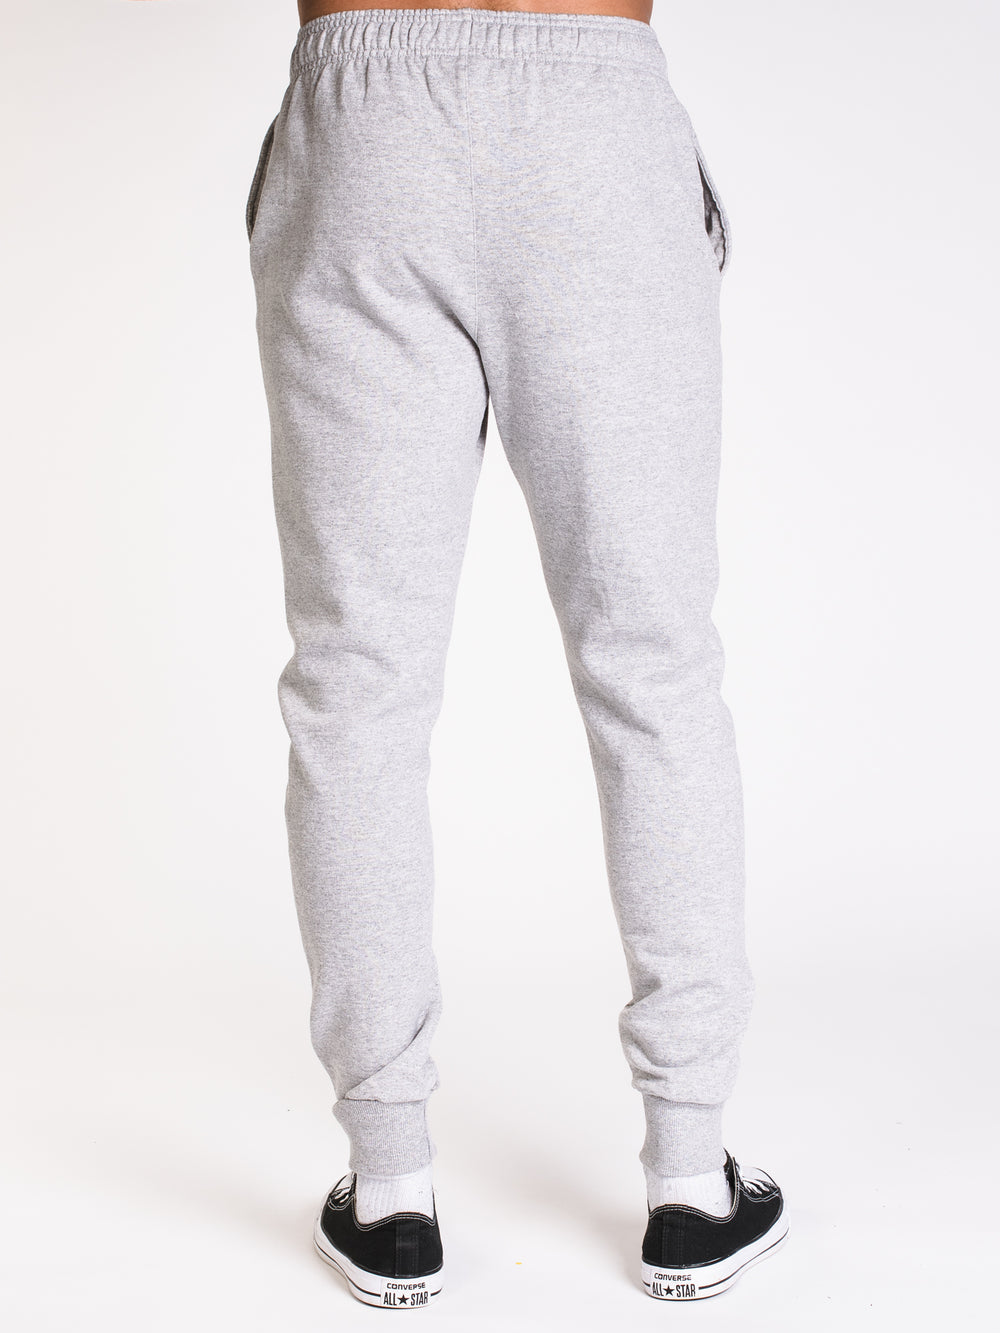 POWERBLEND SCRIPT JOGGER-GY MENS - CLEARANCE